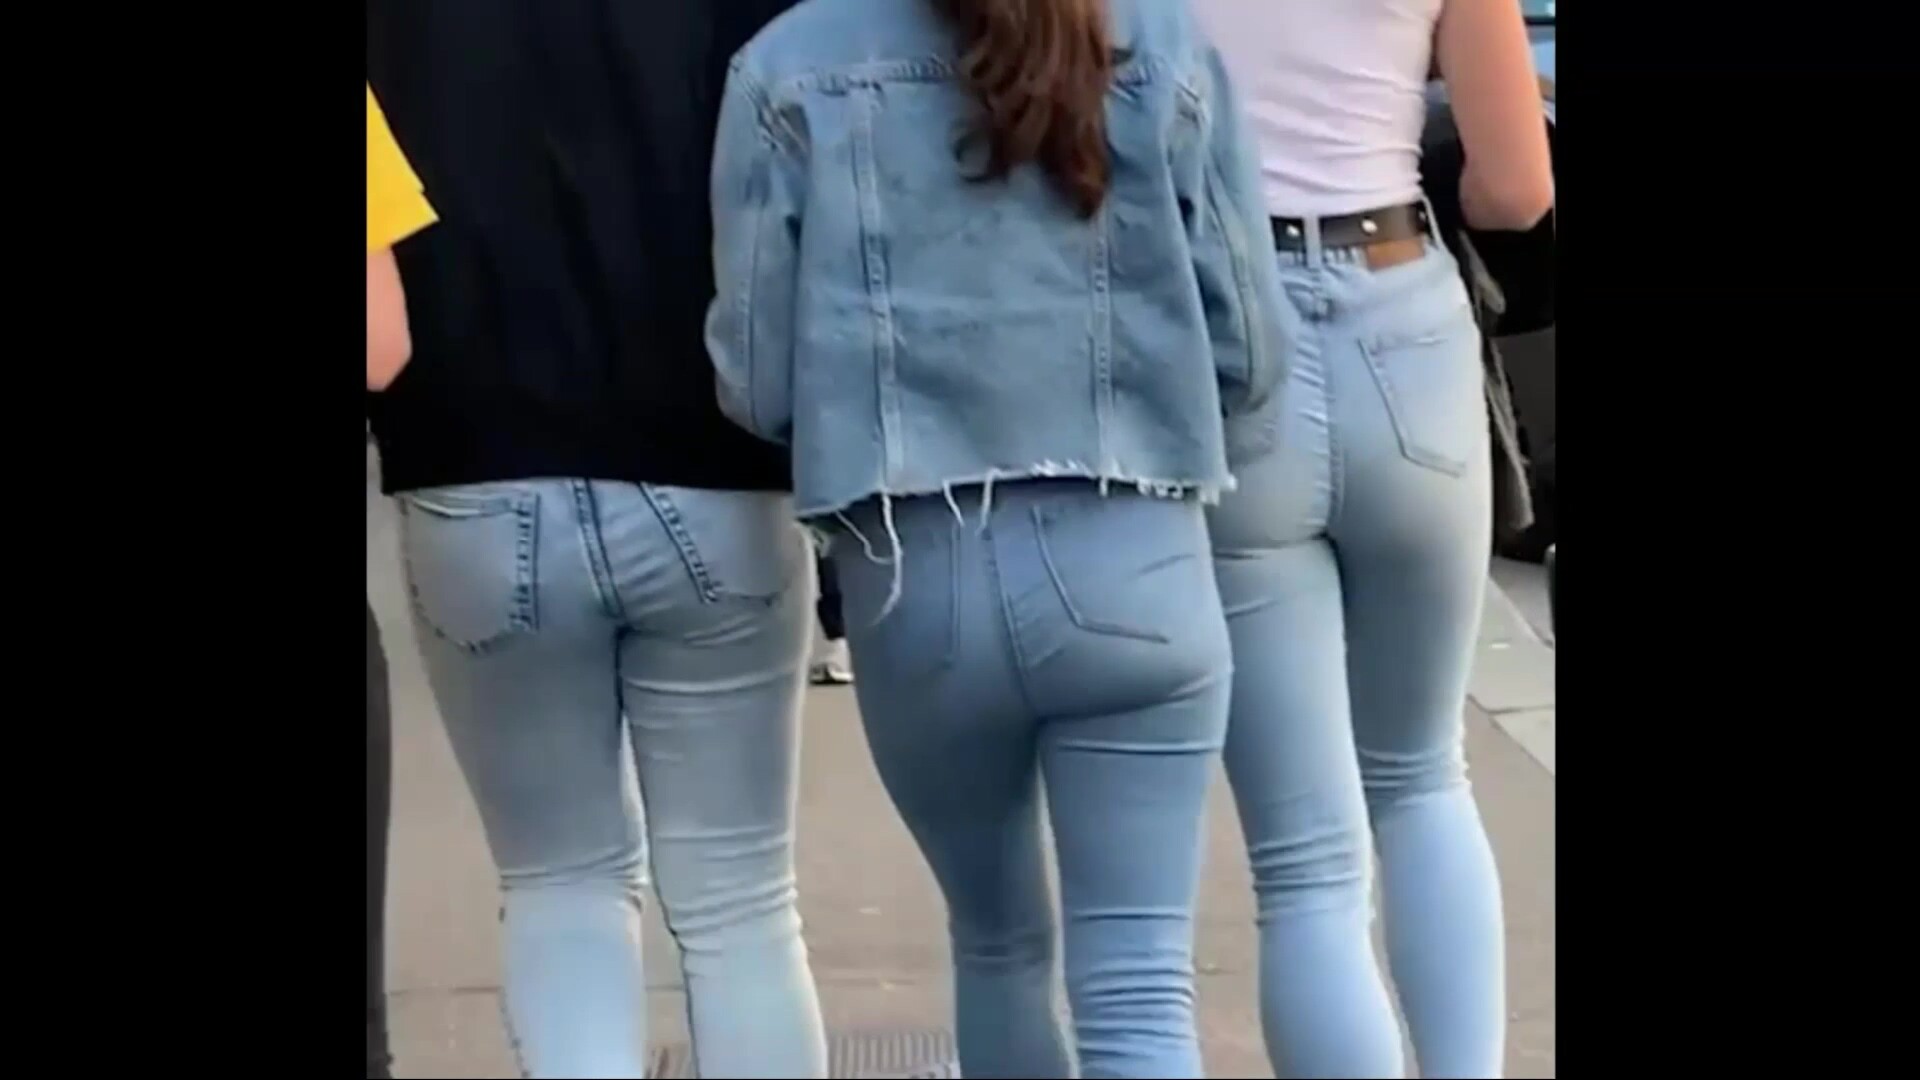 Cute girl with Tight Jean on street image